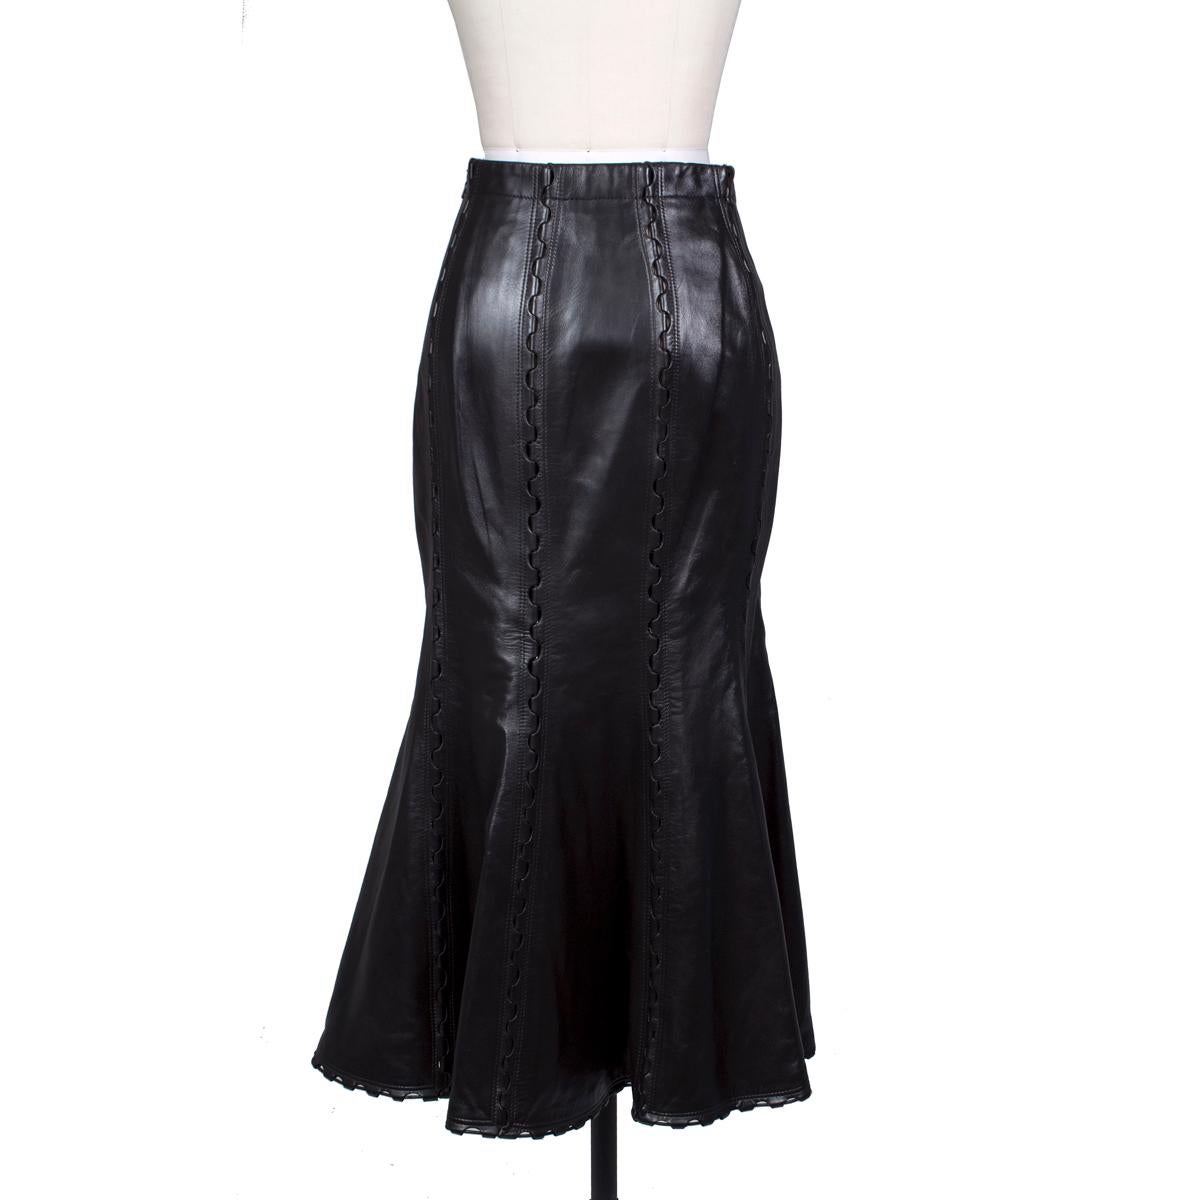 Skirt by Azzedine Alaia
Black leather panels fastened together by interlocking leather (see photo)
Mermaid bodycon shape
Condition: Excellent

Size/Measurements:
Size 38 (FR)
24